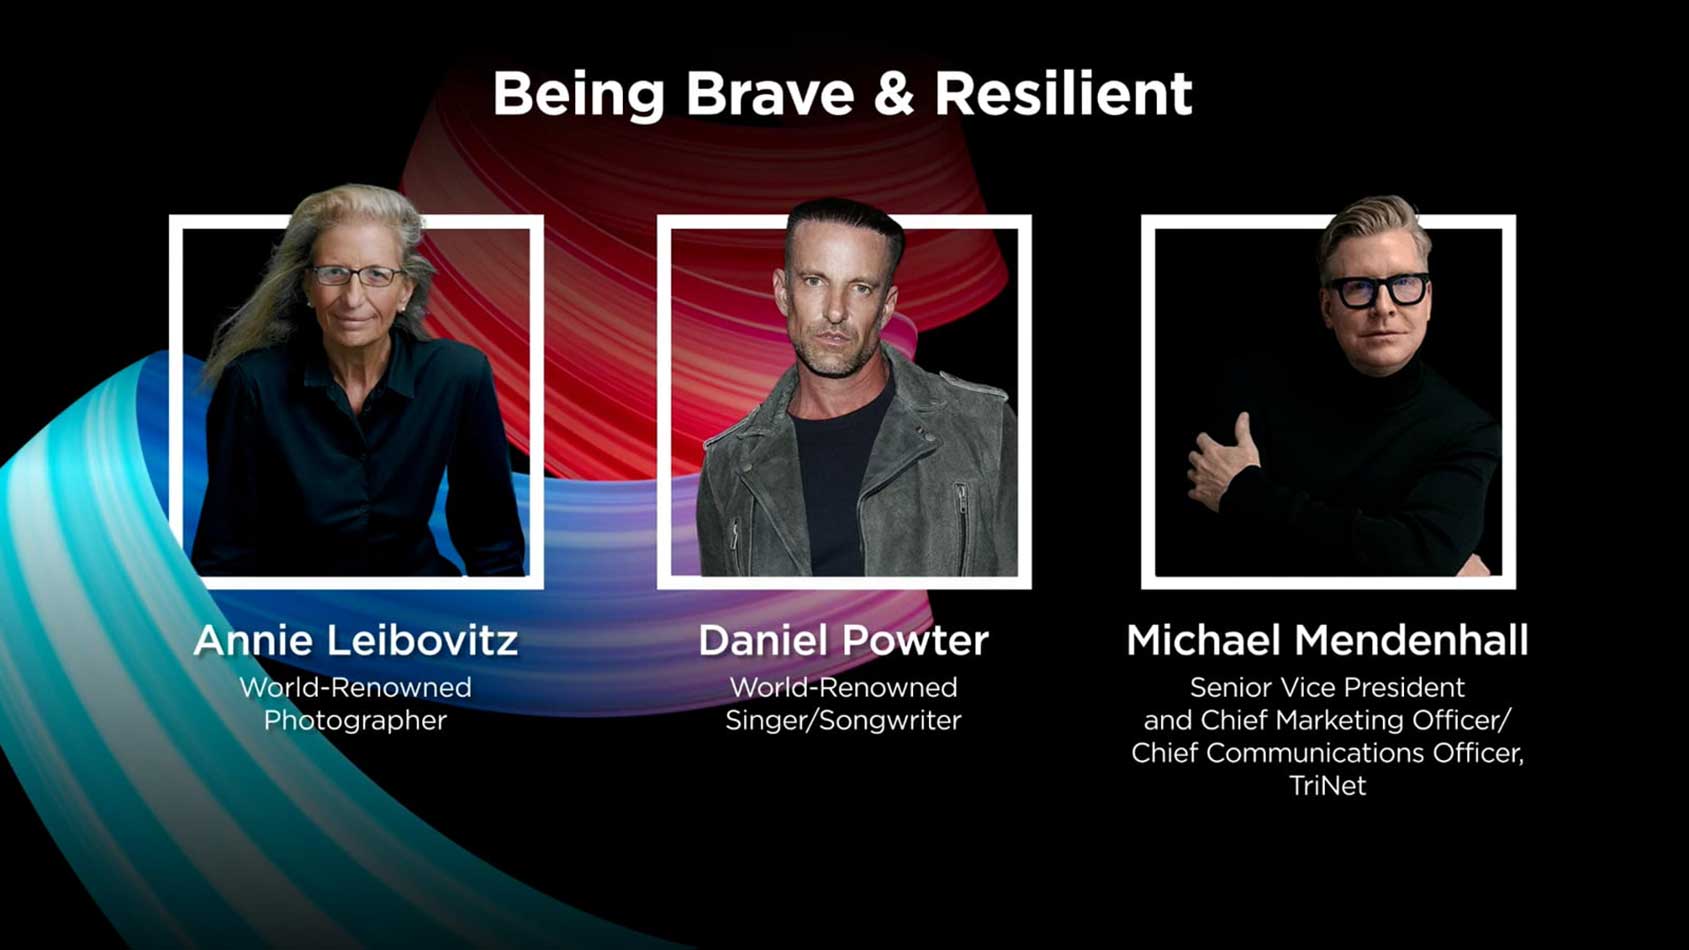 Being Brave & Resilient